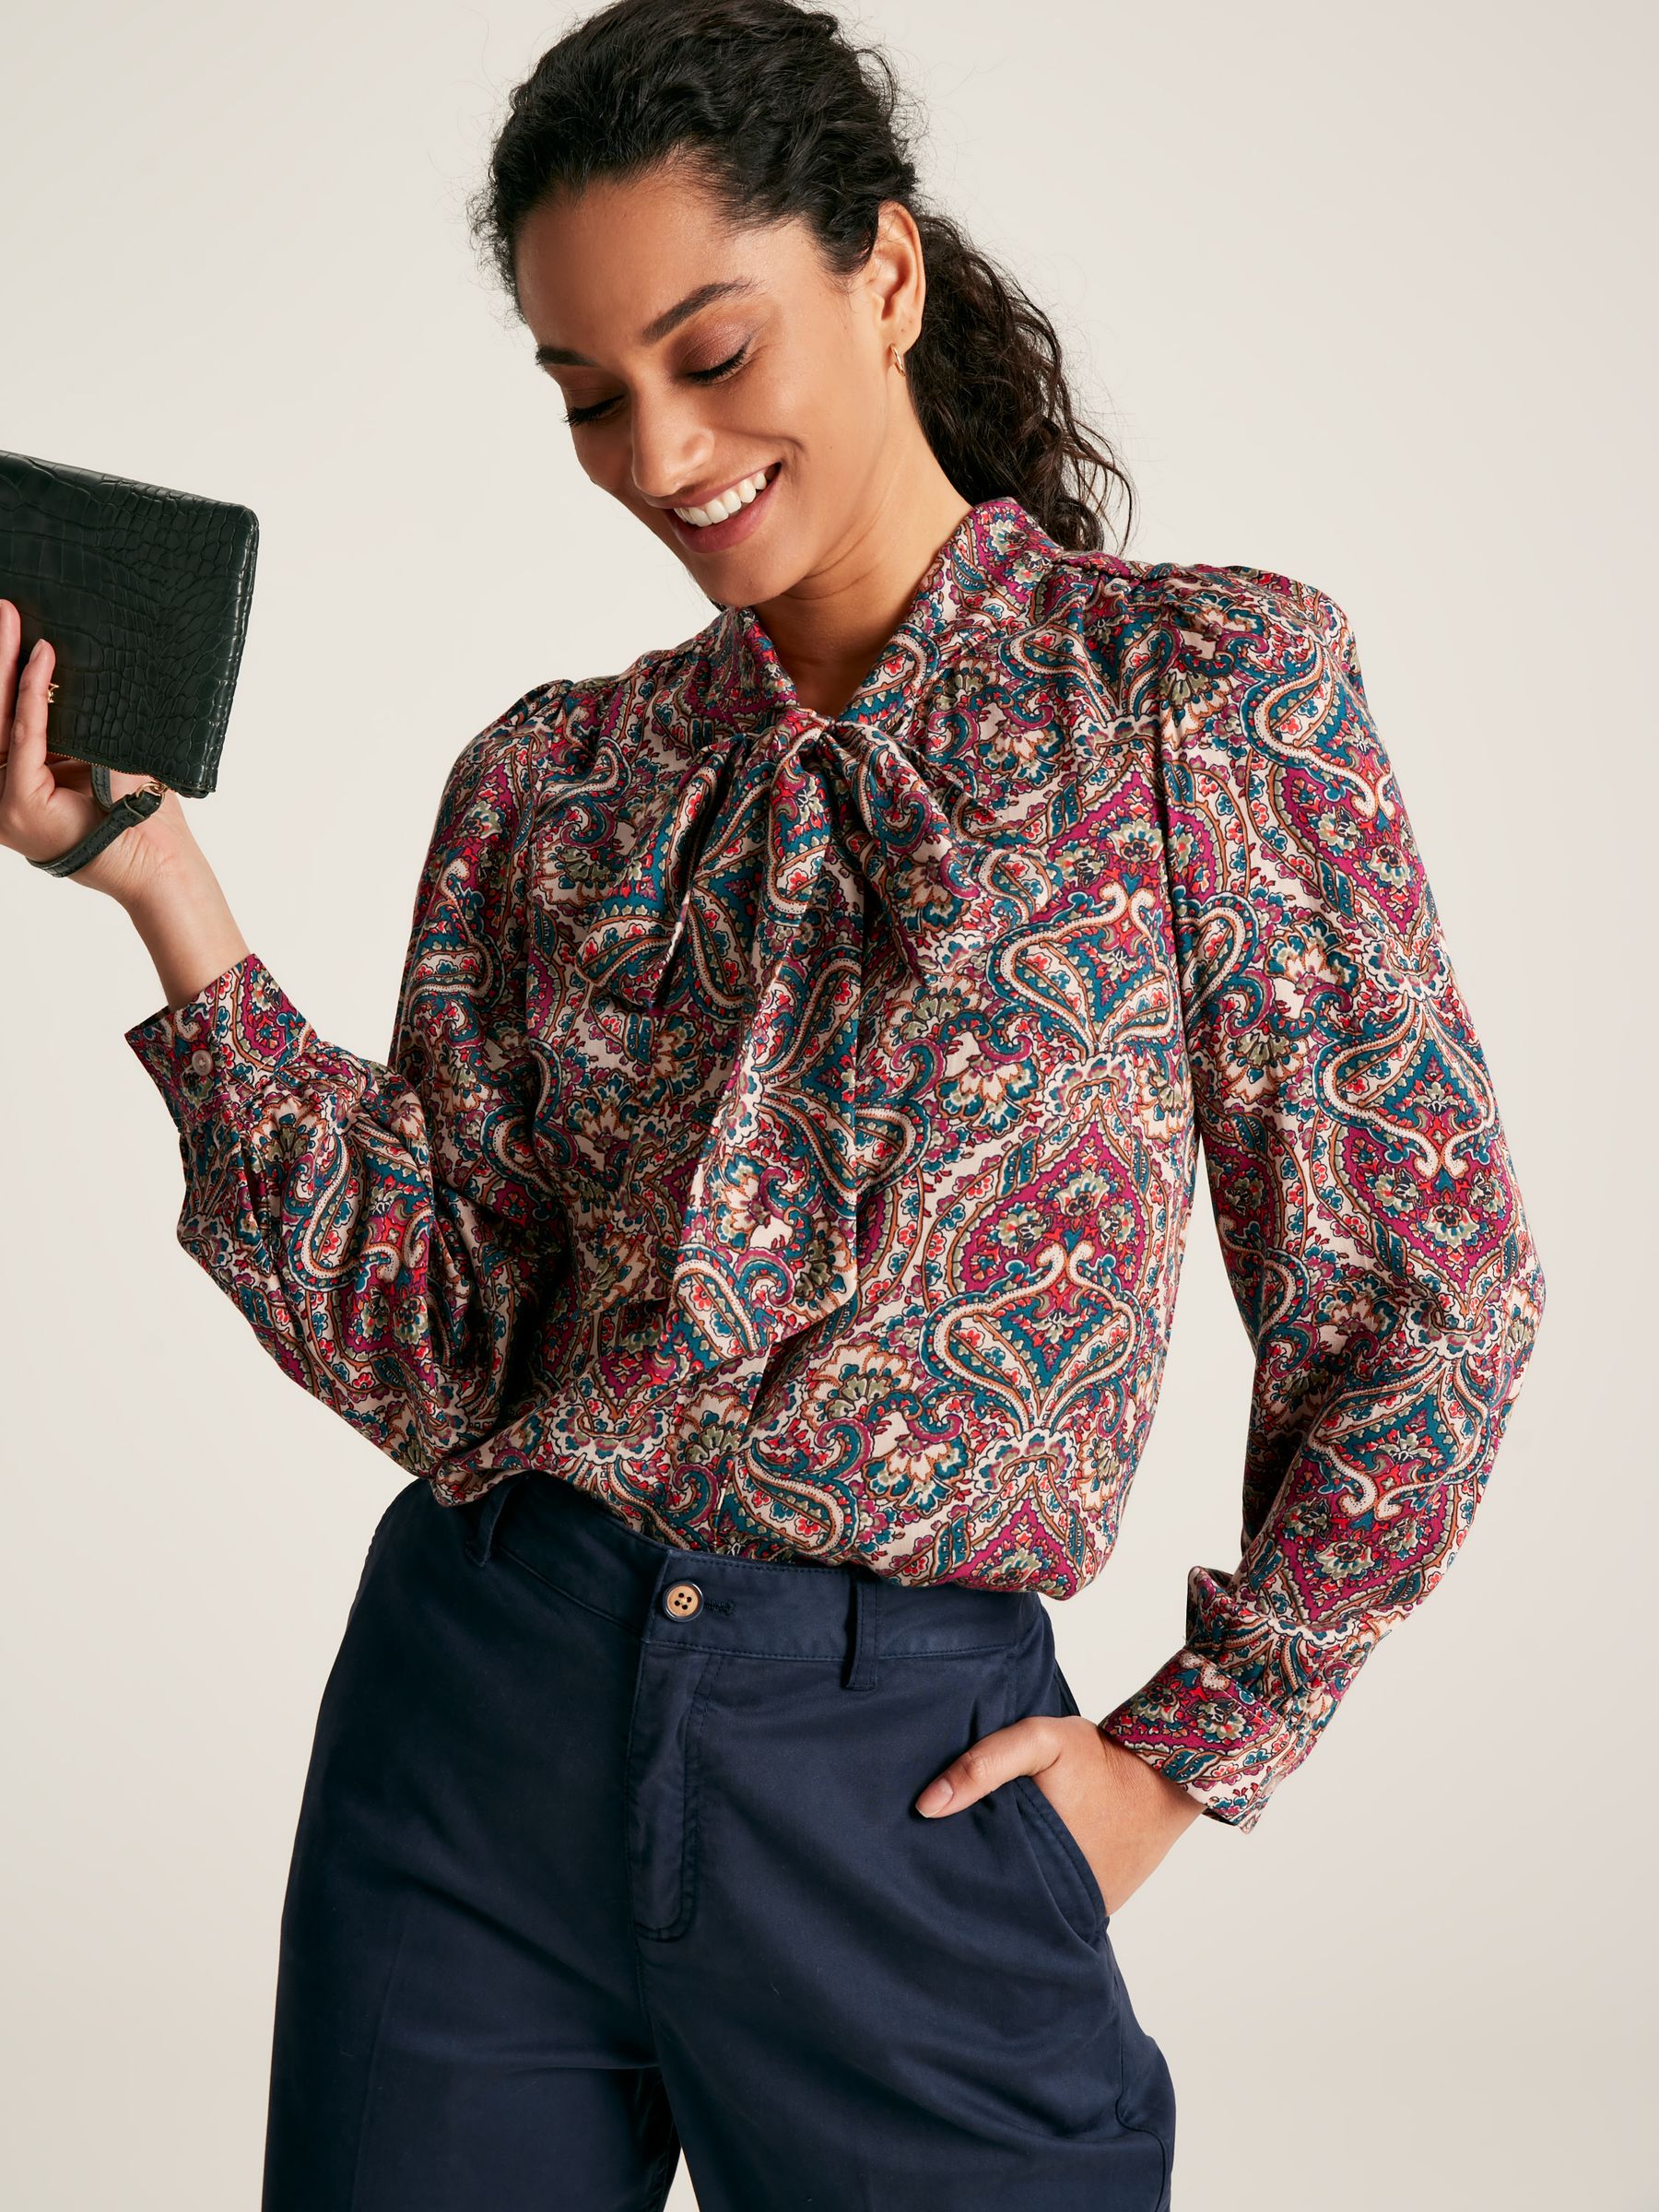 Buy Joules Everly Tie Neck Blouse from the Joules online shop